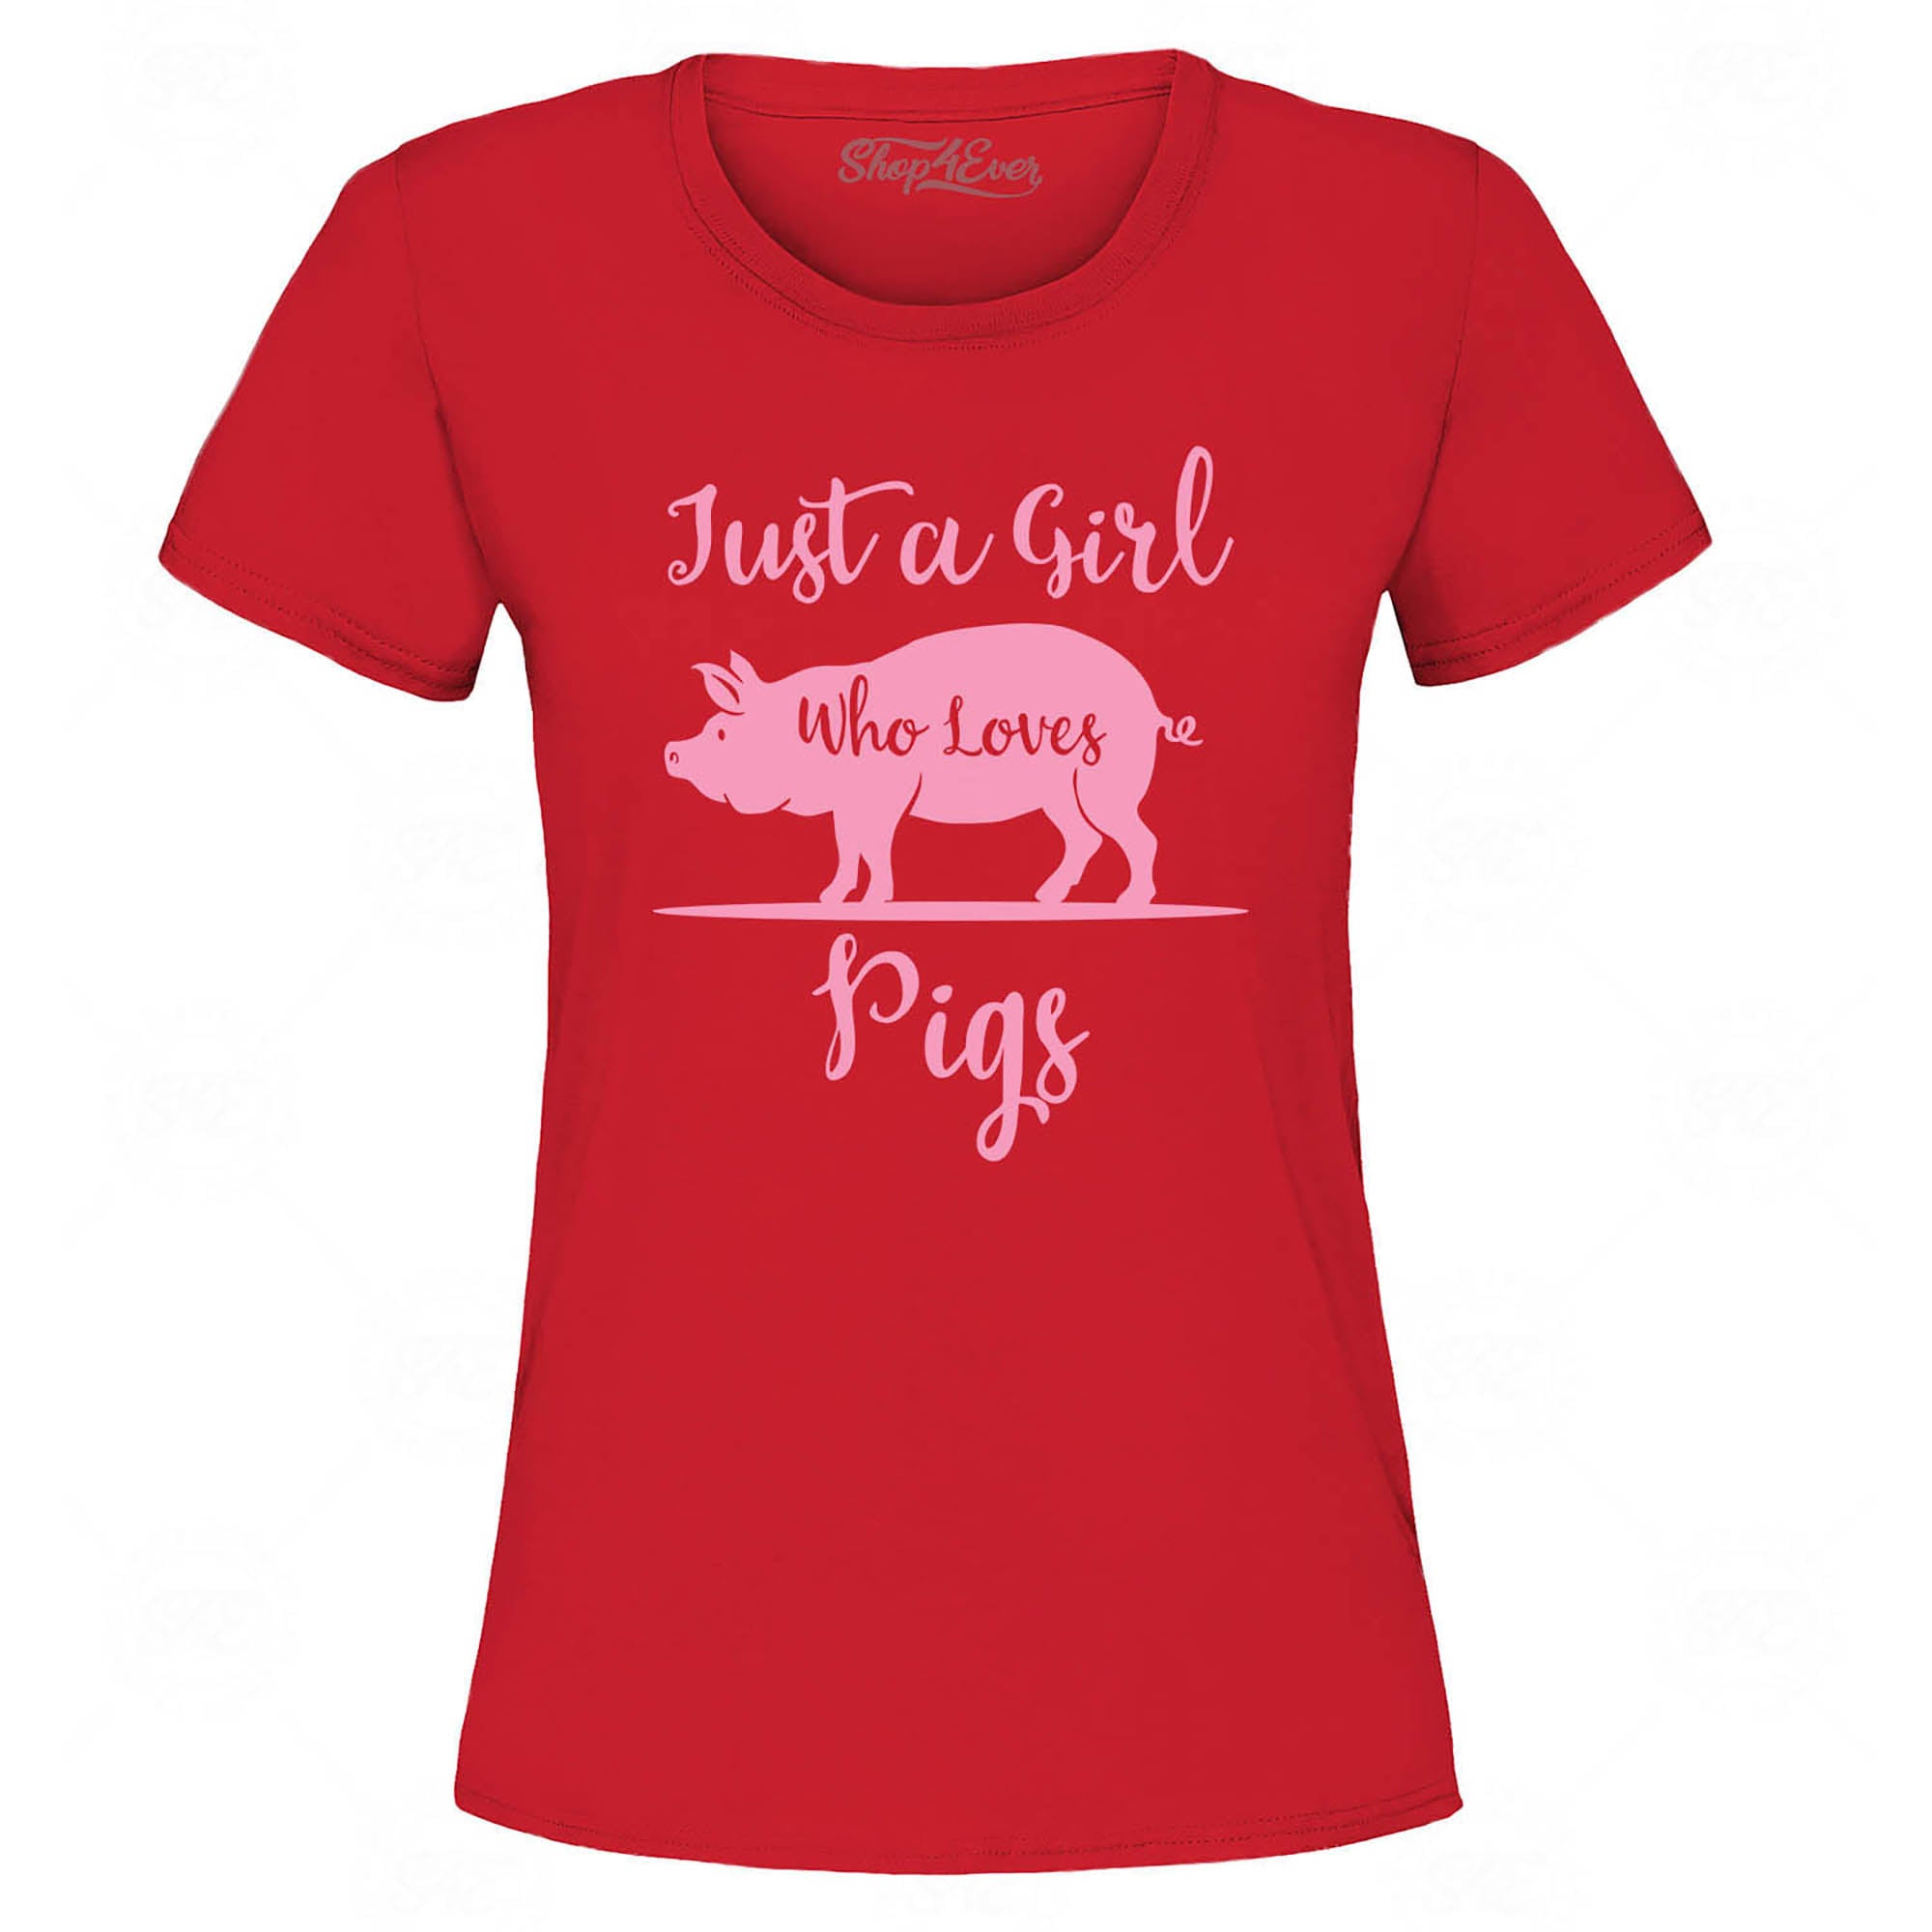 Just A Girl Who Loves Pigs Women's T-Shirt